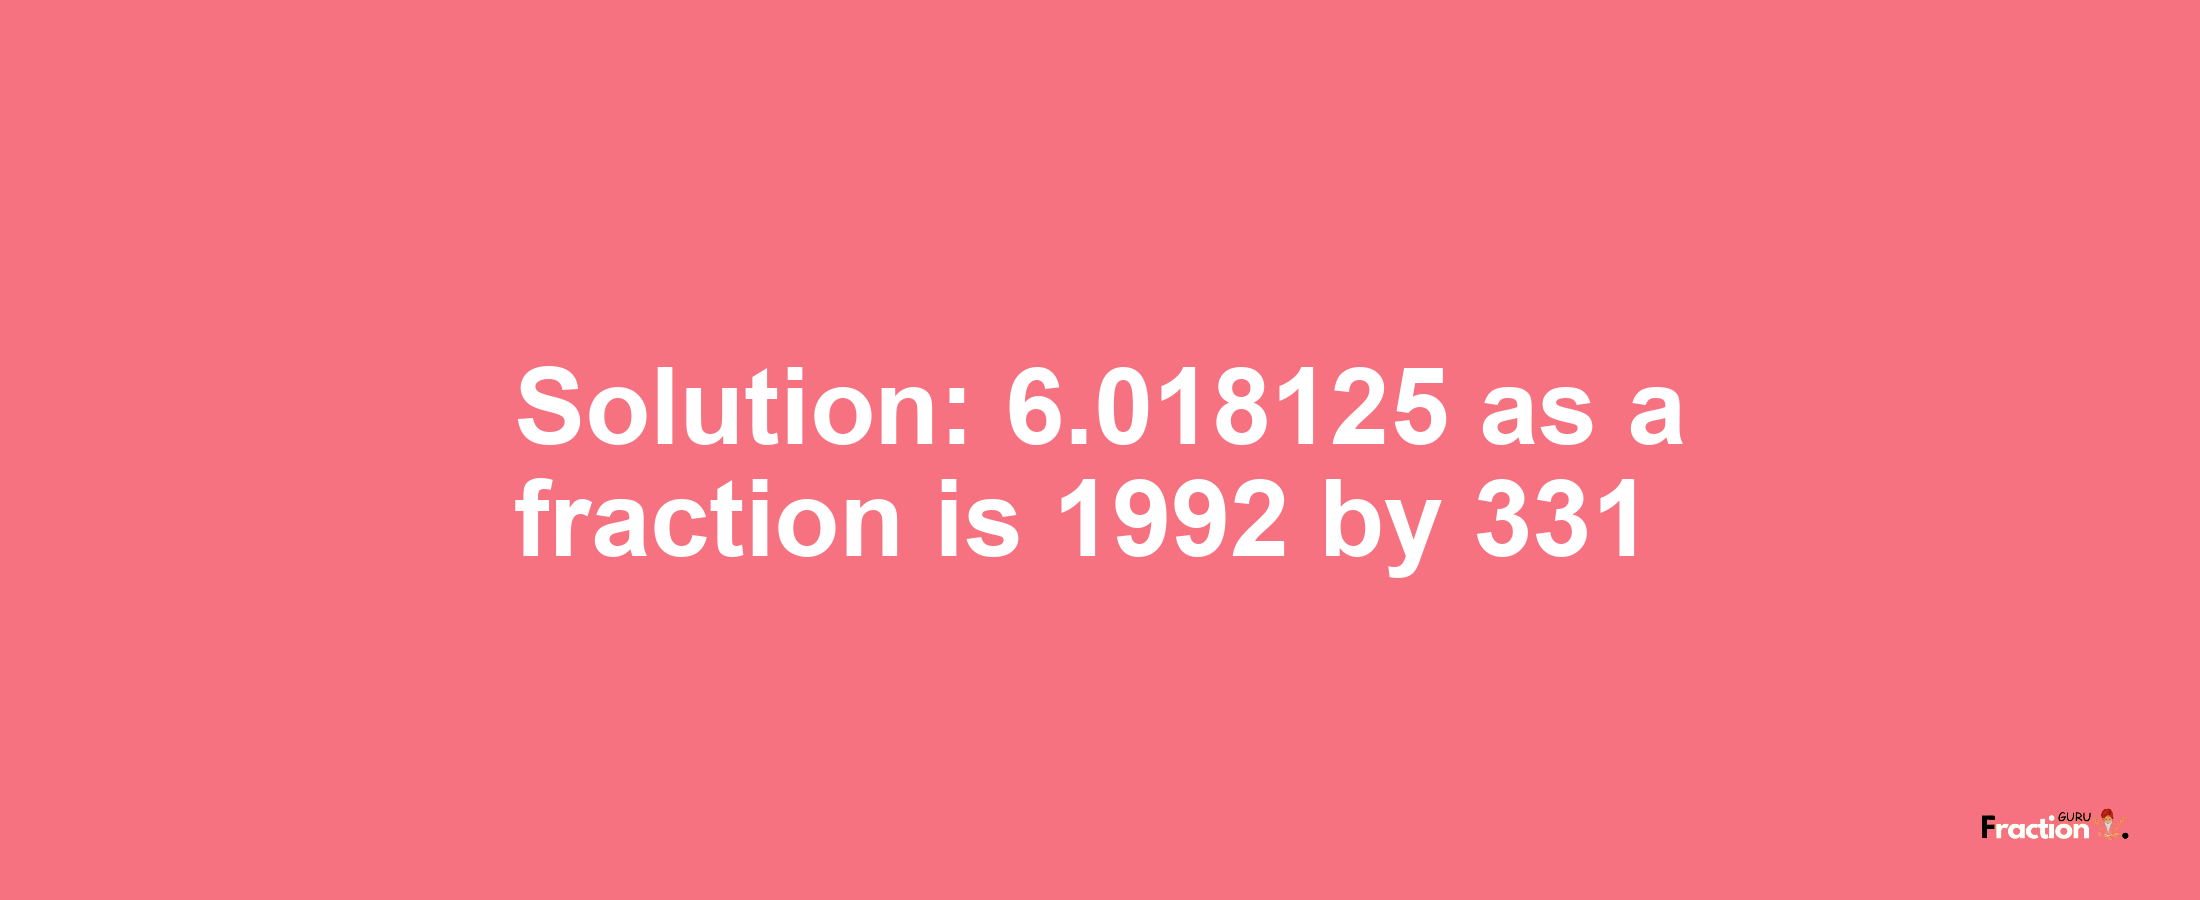 Solution:6.018125 as a fraction is 1992/331